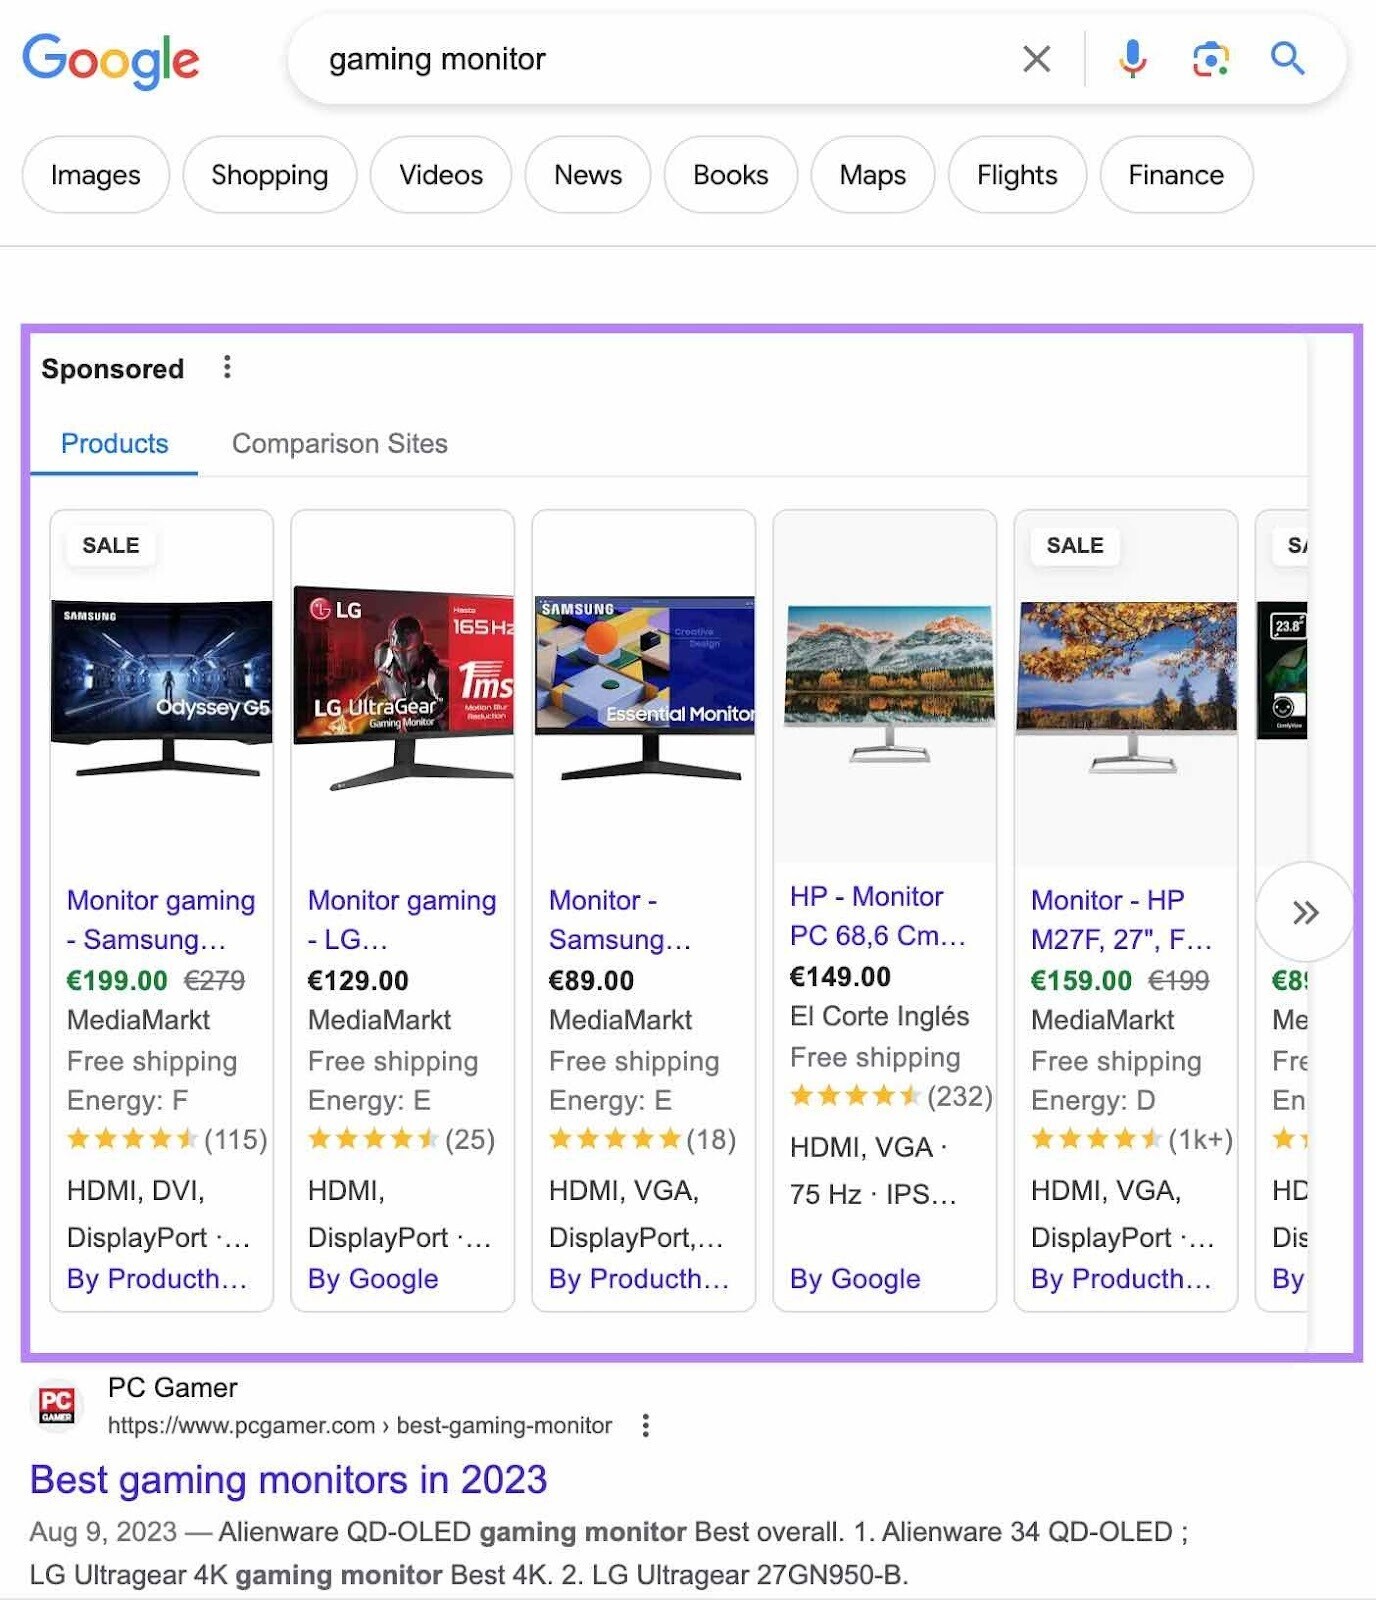 product listing ads in Google’s search results for "gaming monitor" search